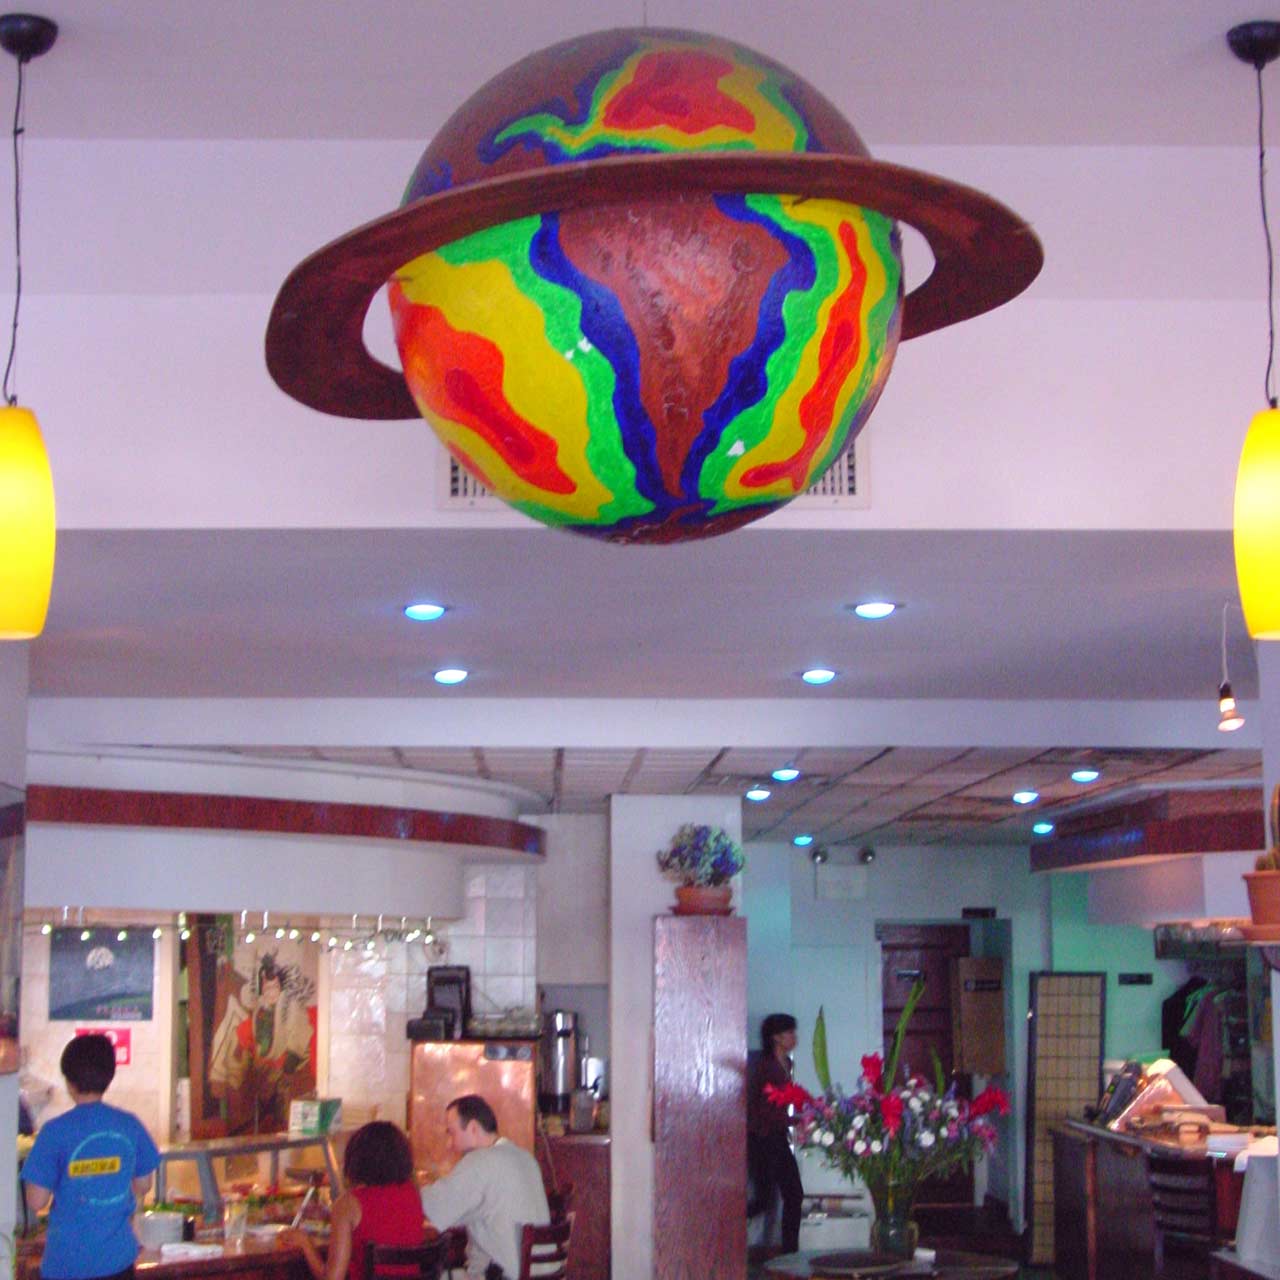 Inside Planet Sushi, with an artistic, ringed, multihued planet hanging from the ceiling.